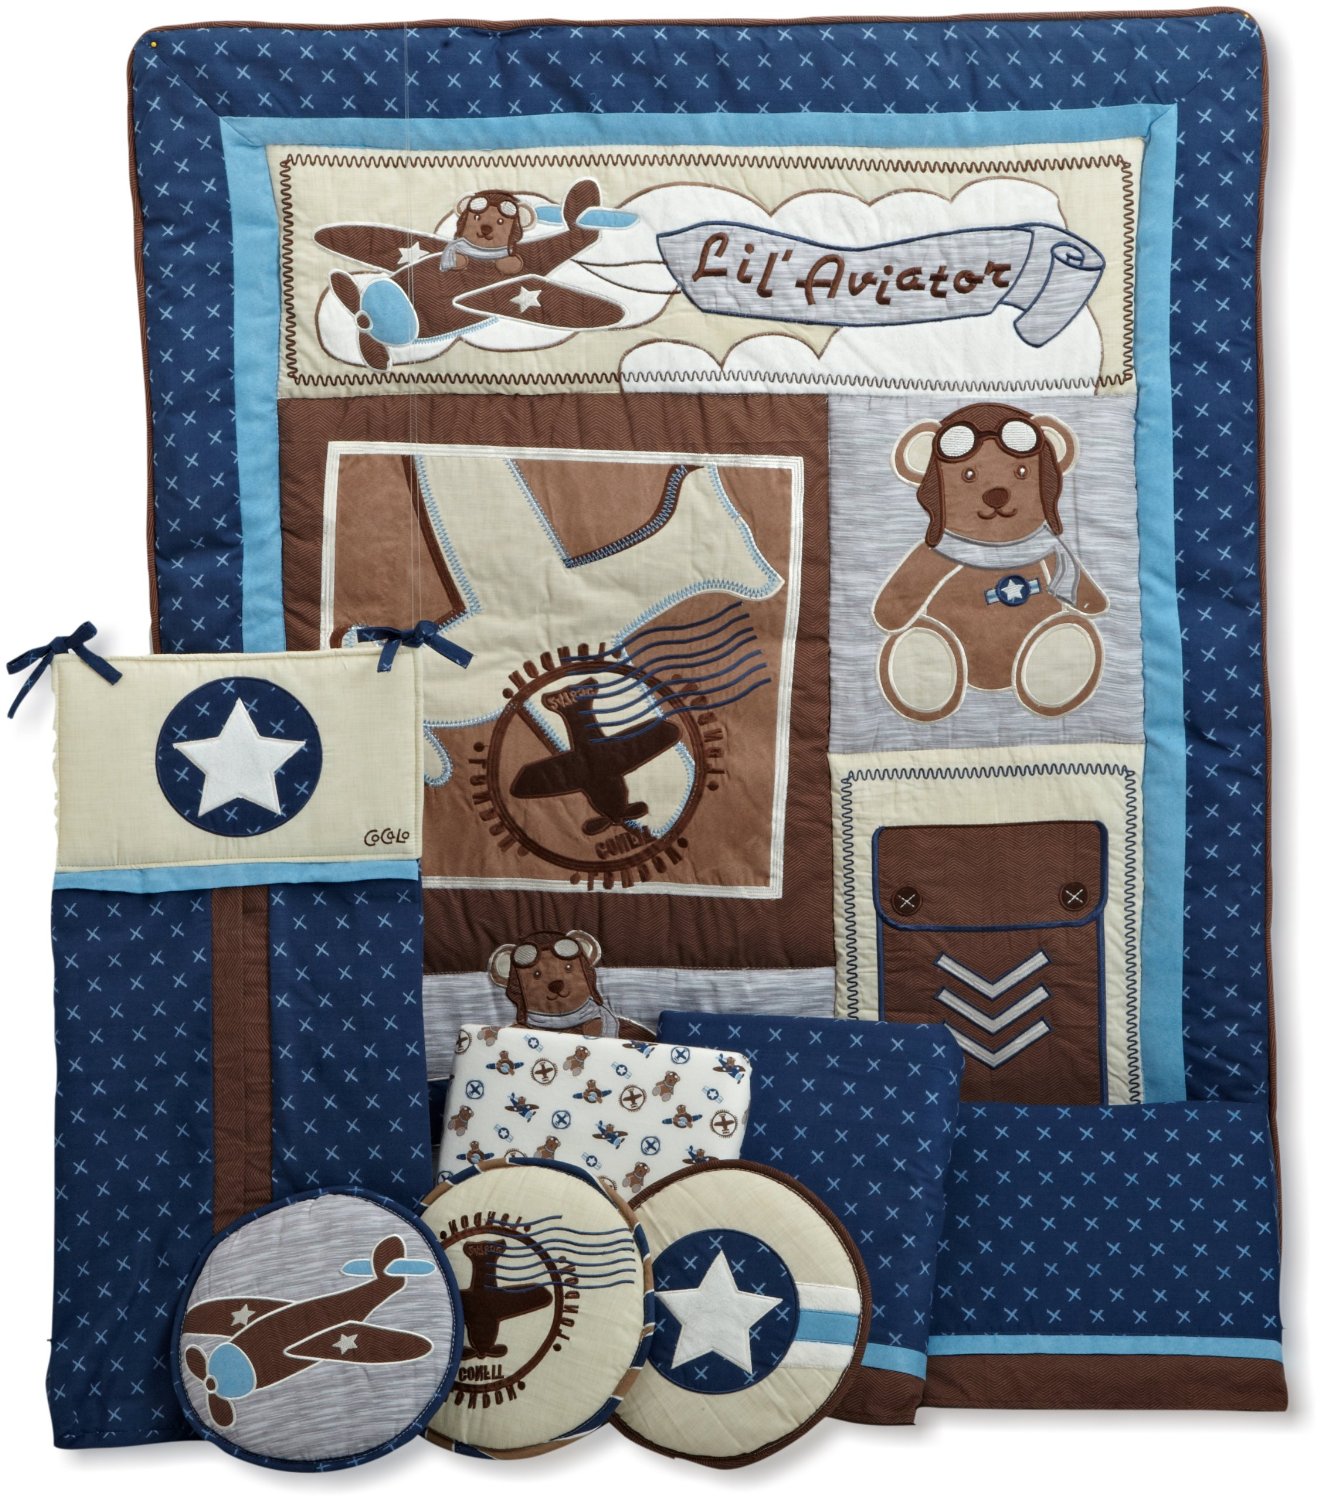 Cocalo Lil Aviator Baby Bedding